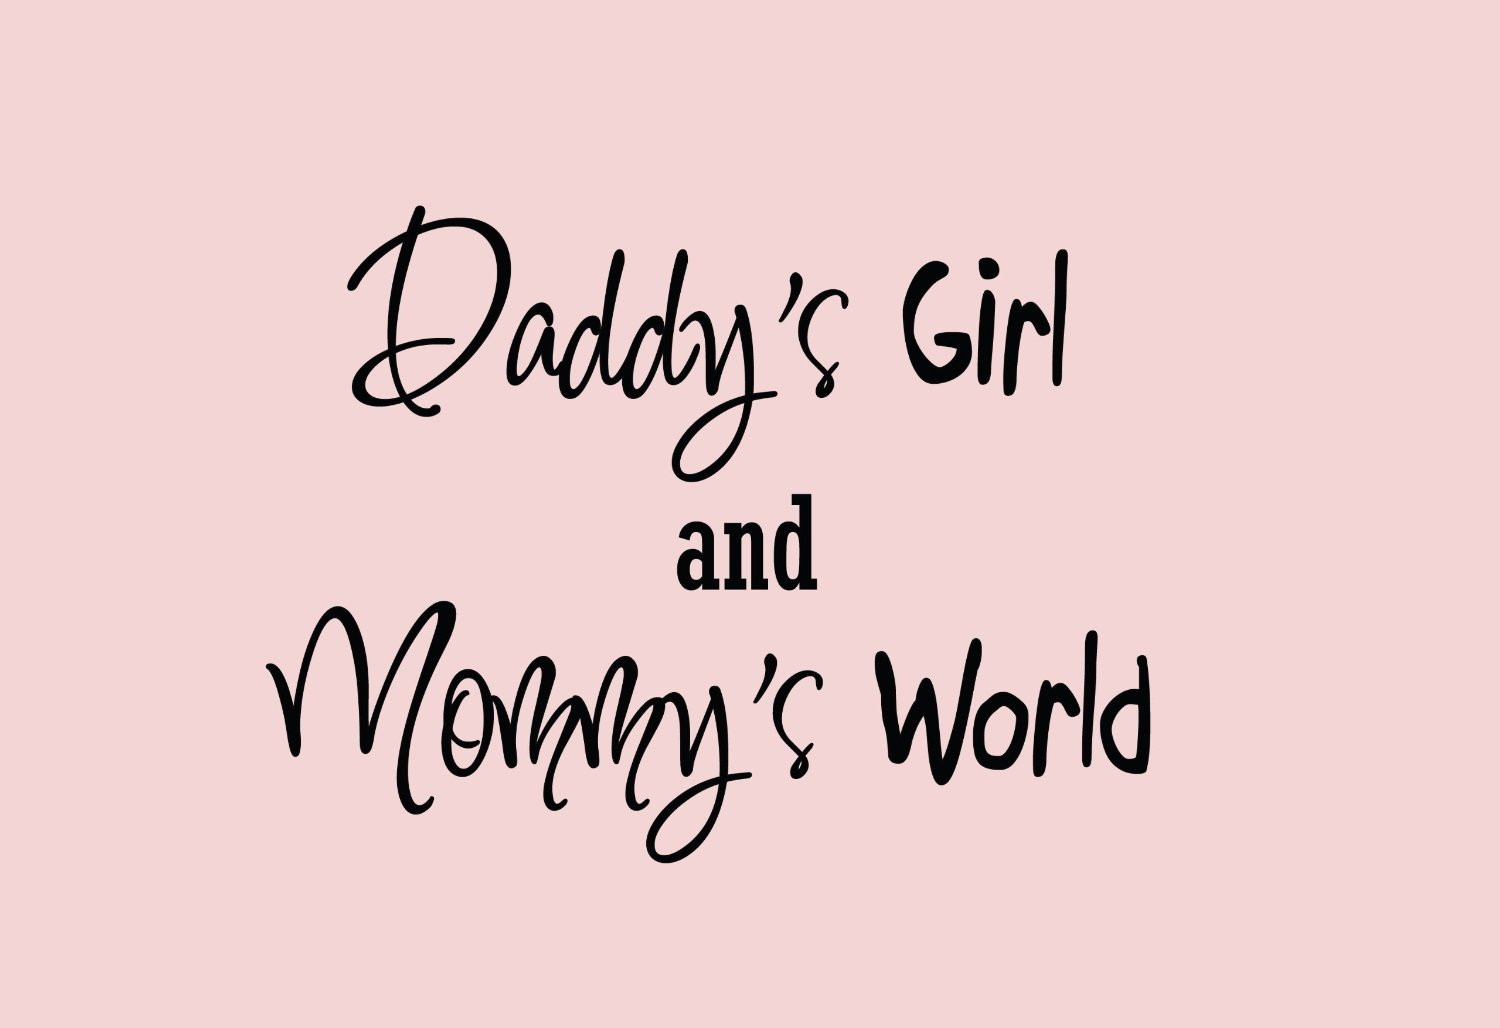 Baby Daddy Quotes Images
 I Love My Baby Daddy Quotes And Sayings QuotesGram